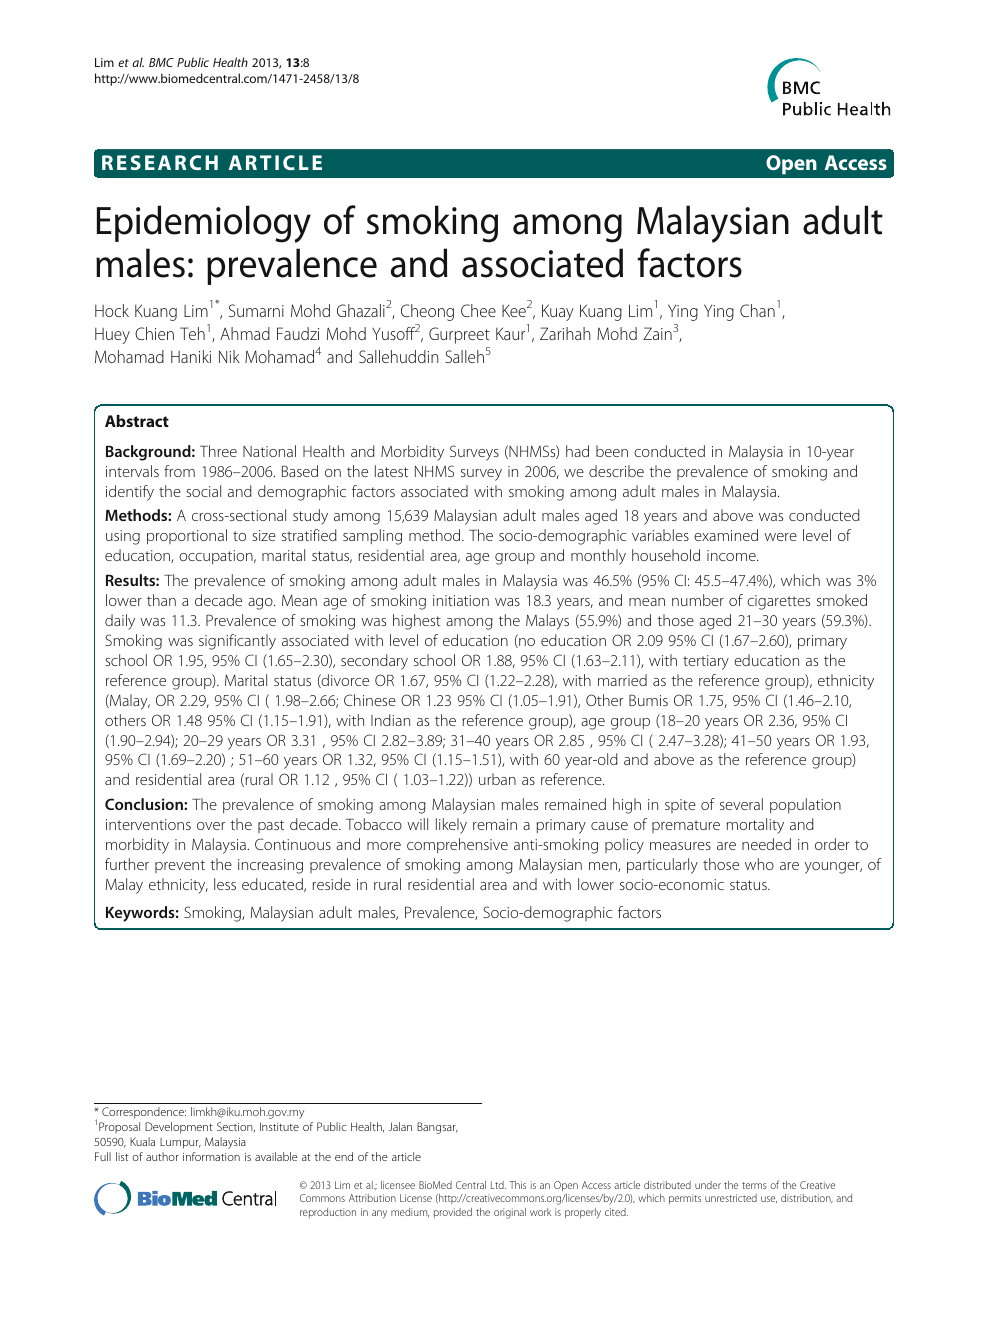 Epidemiology Of Smoking Among Malaysian Adult Males Prevalence And Associated Factors Topic Of Research Paper In Health Sciences Download Scholarly Article Pdf And Read For Free On Cyberleninka Open Science Hub